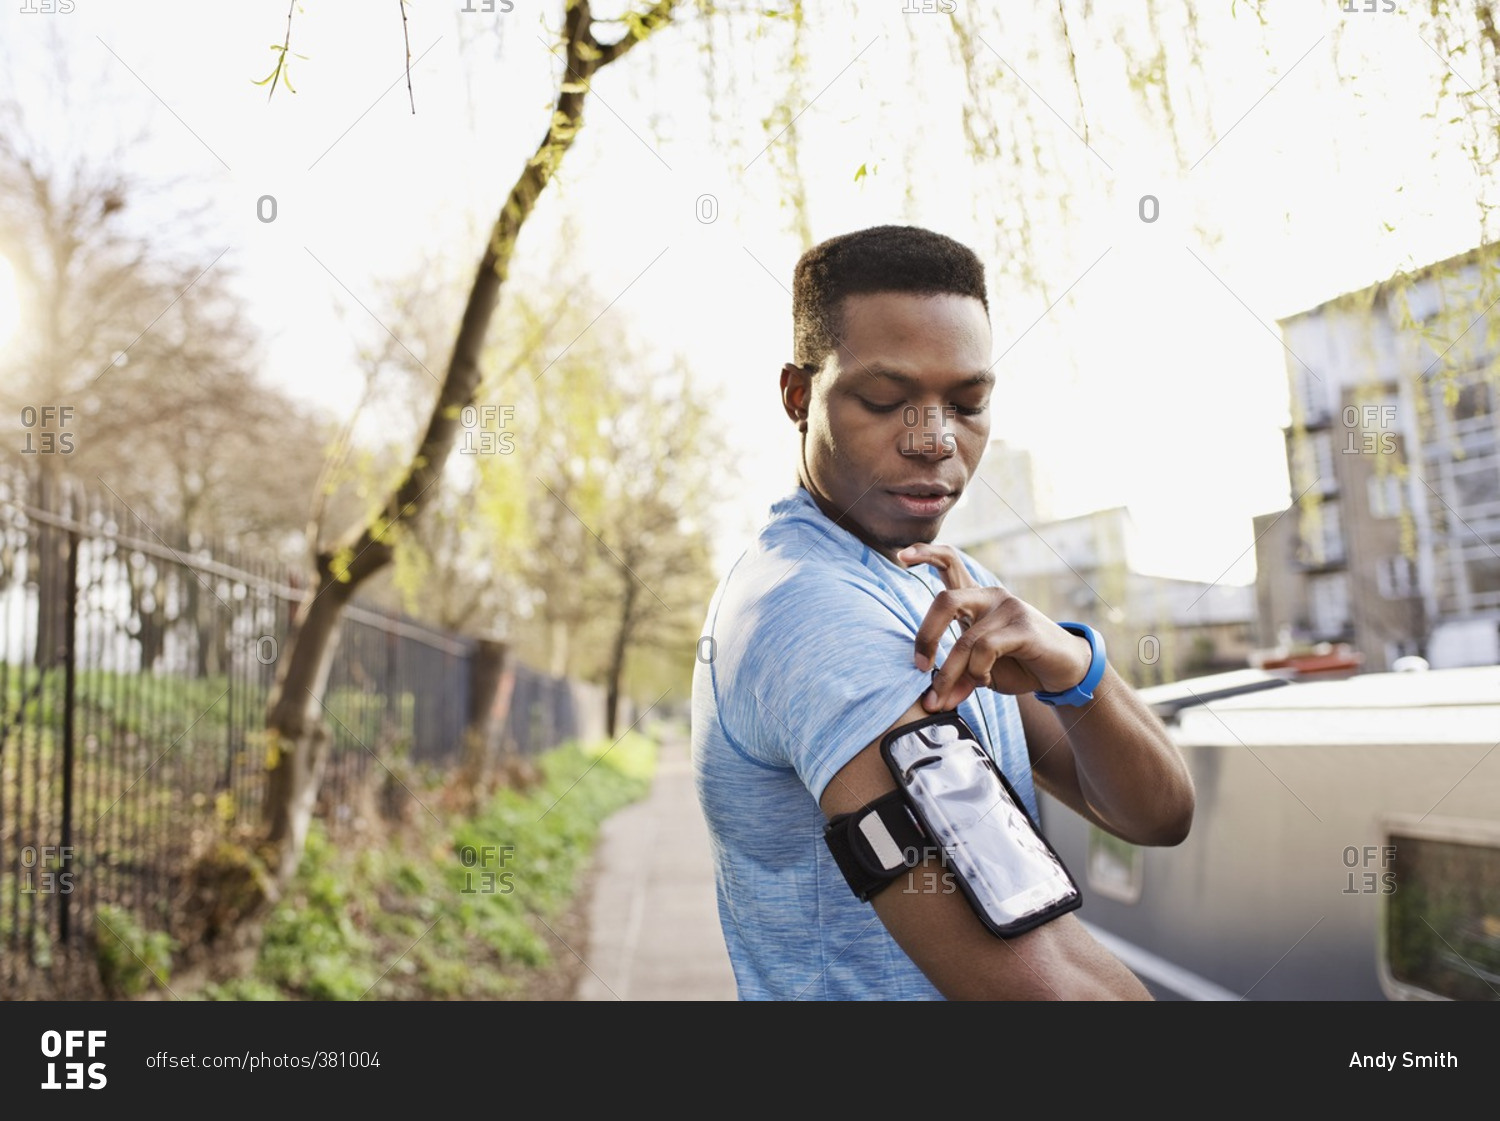 Portrait of an African American man adjusting a digital music player before a workout